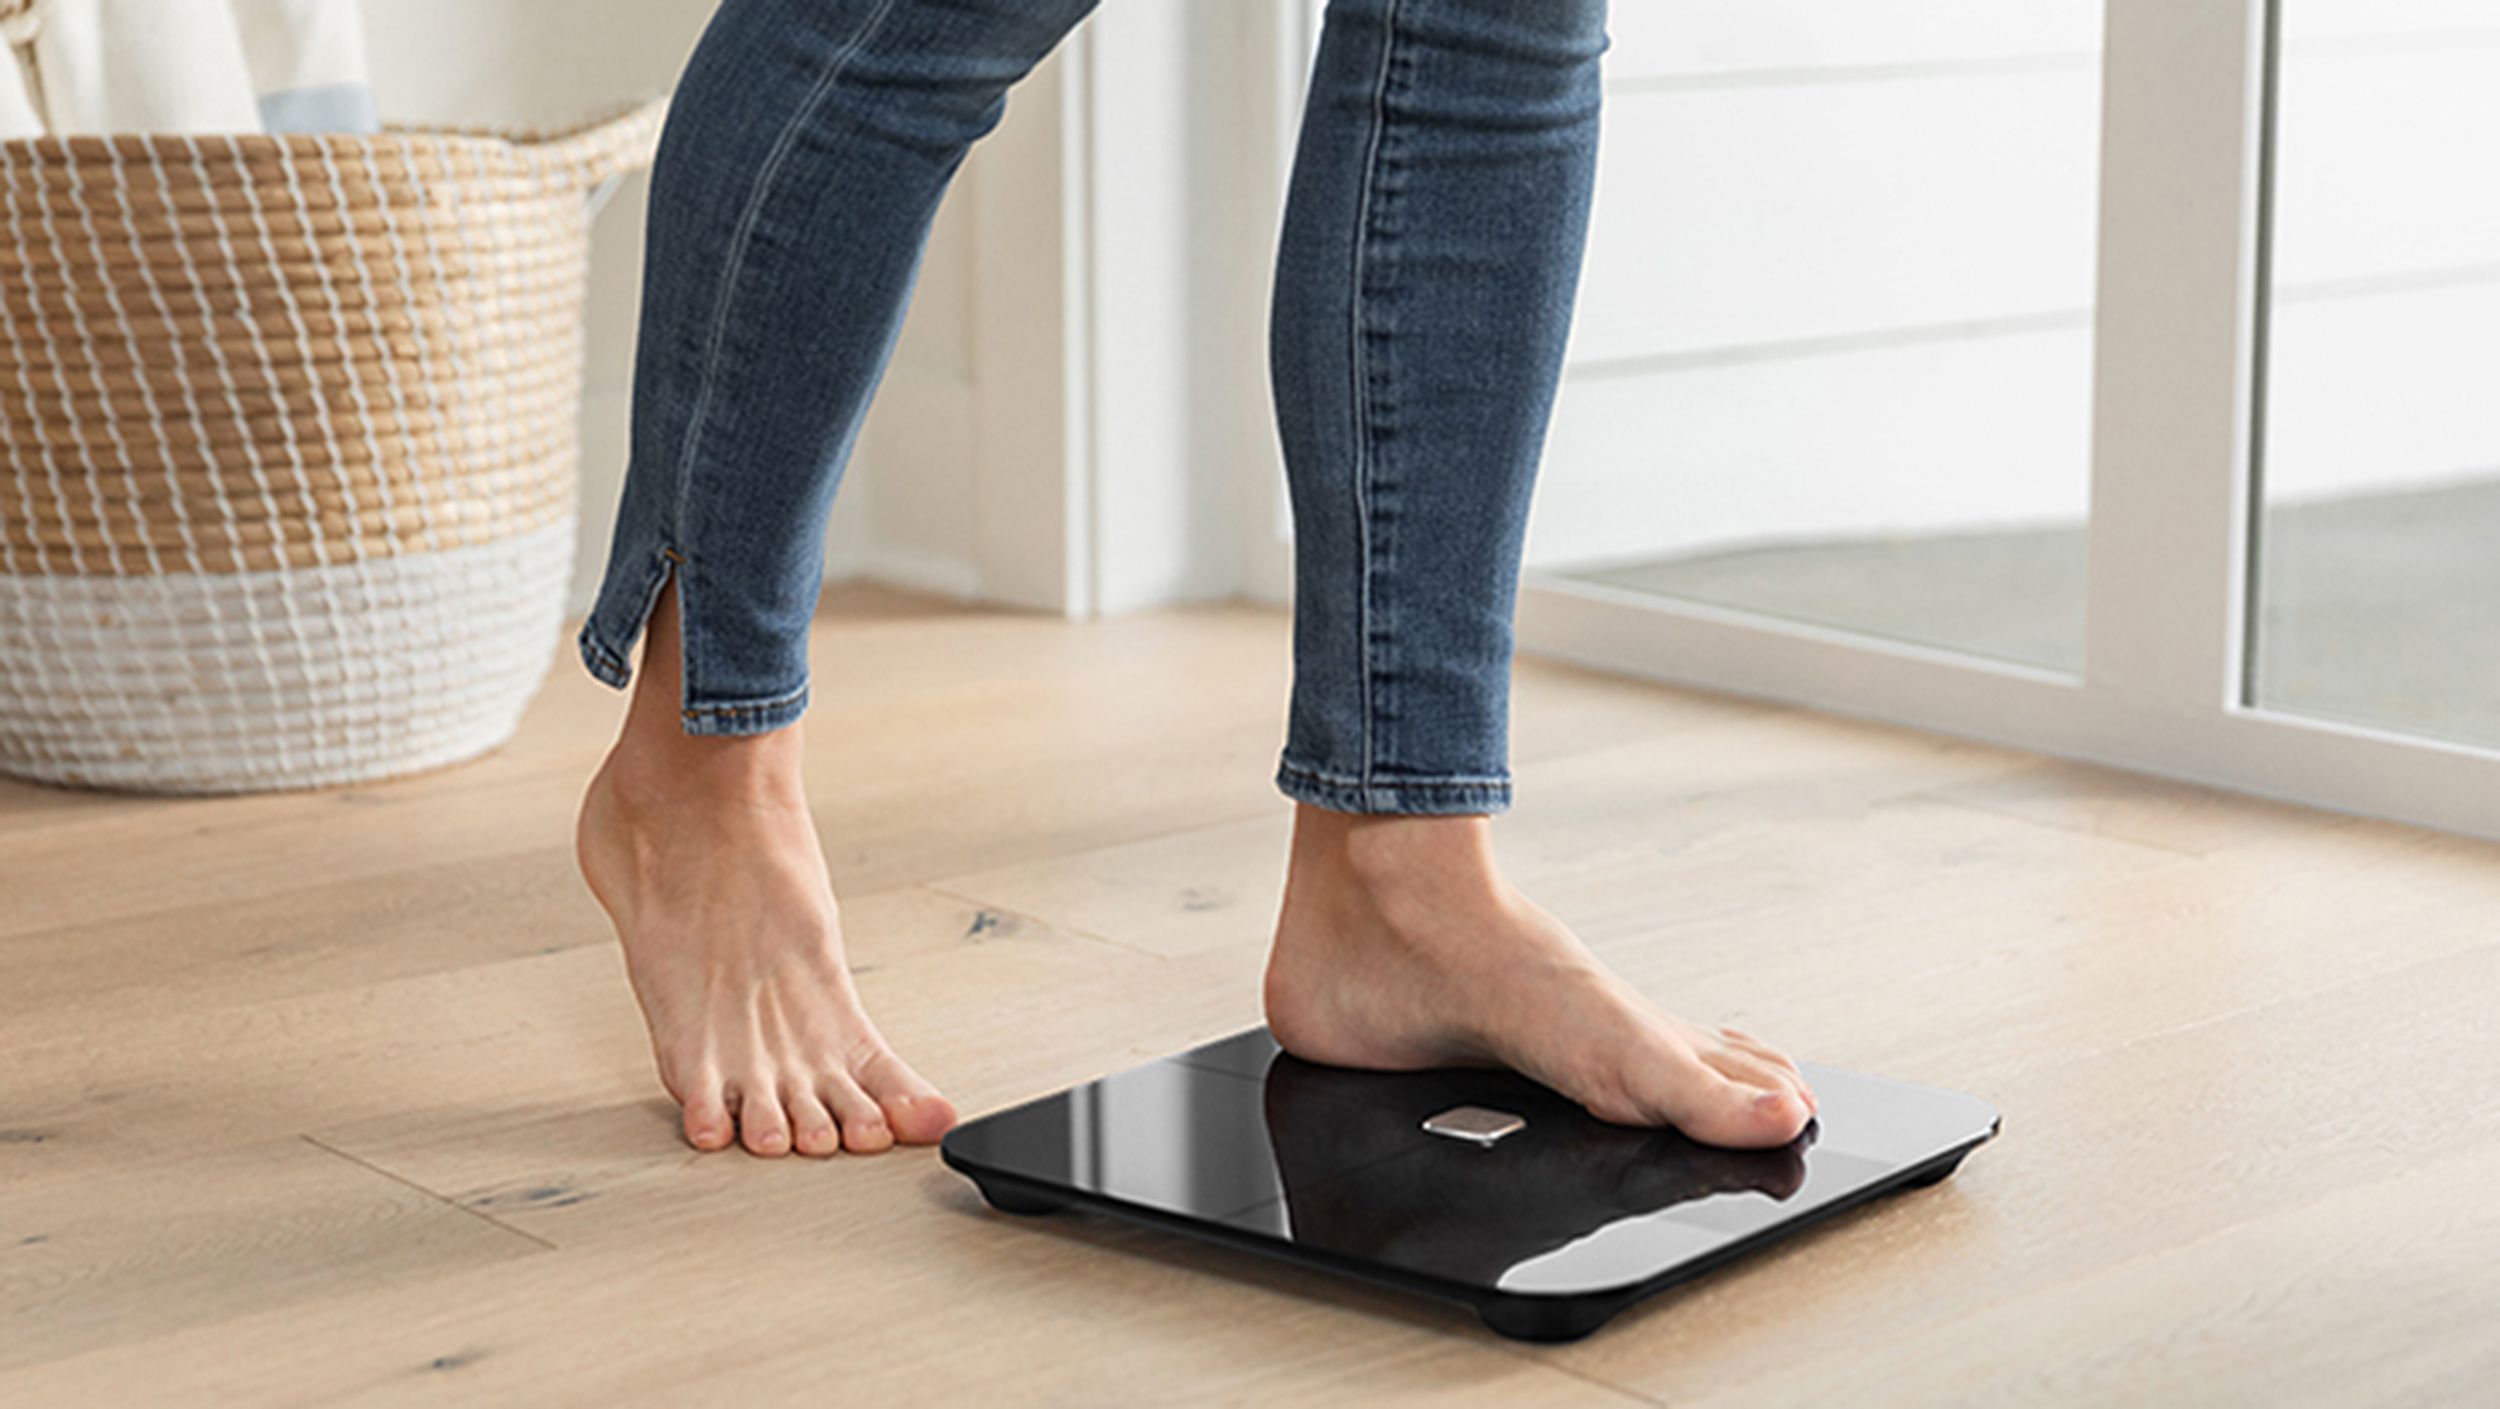 Bathroom Weighing Scales Smart Bluetooth Android and Apple Compatible App Scales